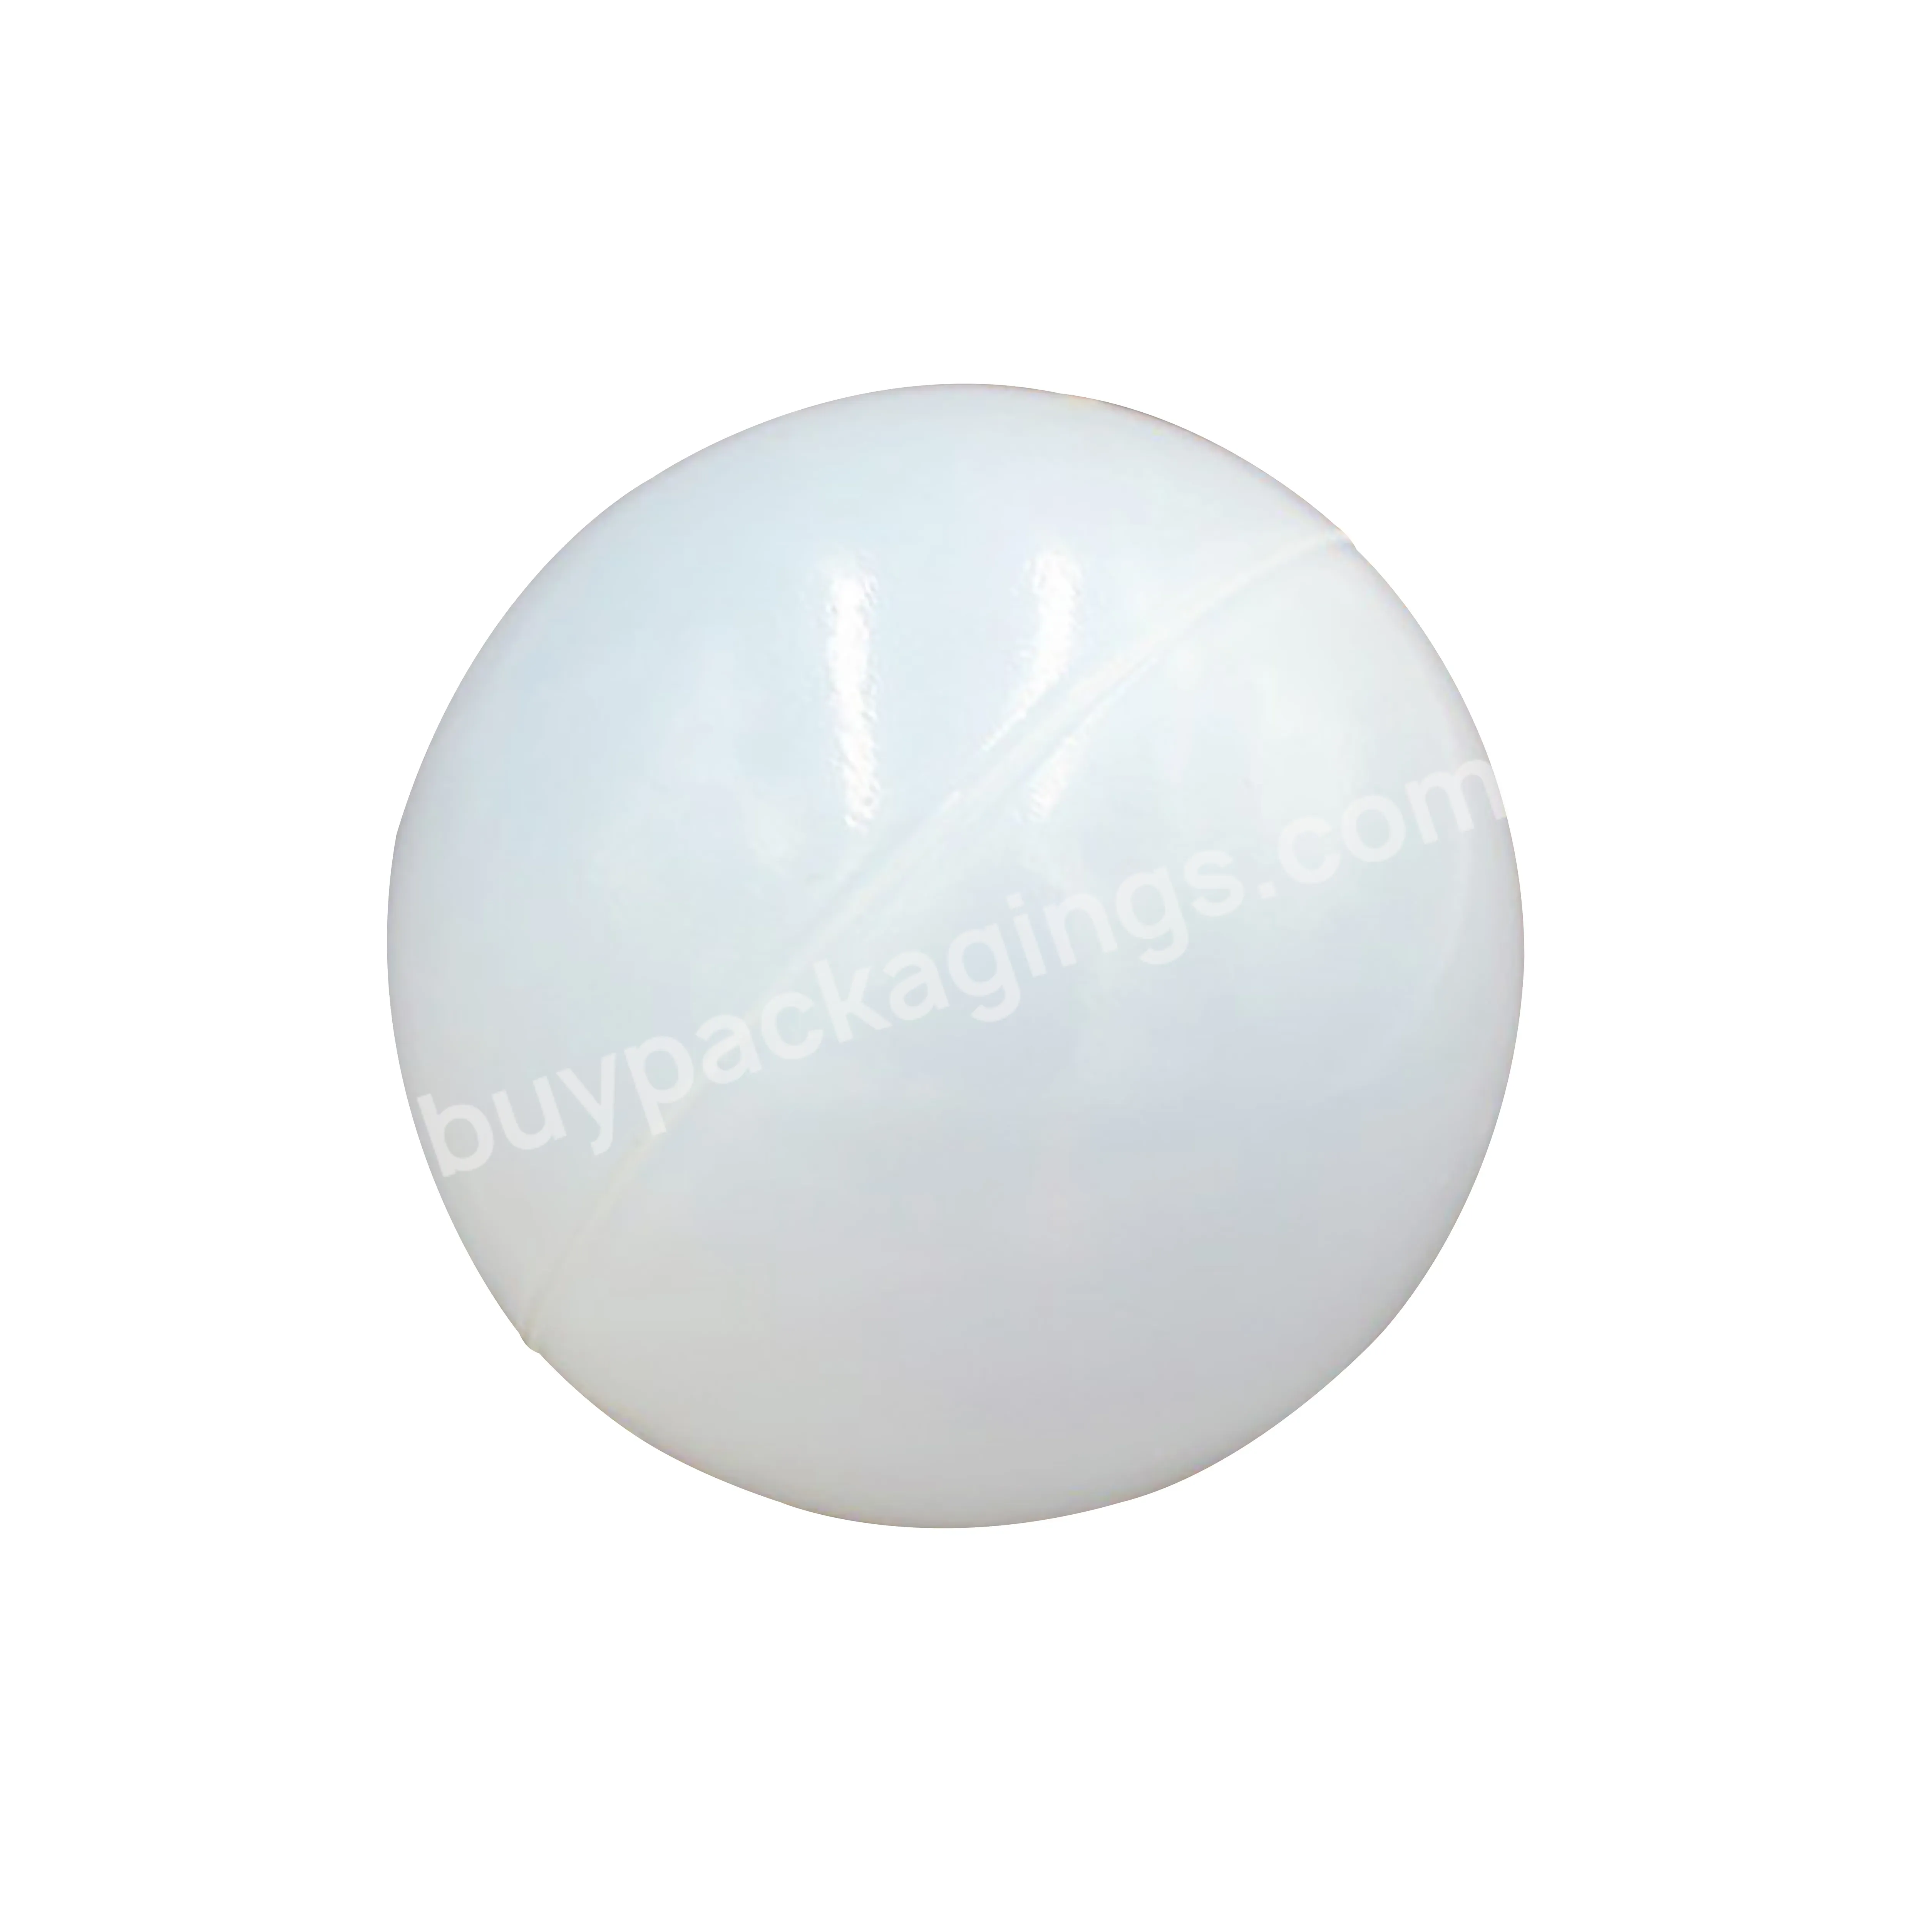 10mm-50mm Polypropylene Hollow Lubricated Pp Plastic Ball Roller Ball Roll On Ball For Roll On Bottle - Buy 10mm-50mm Polypropylene Hollow Lubricated Ball,Pp Plastic Ball Roller Ball Roll On Ball,Roll On Ball For Roll On Bottle.